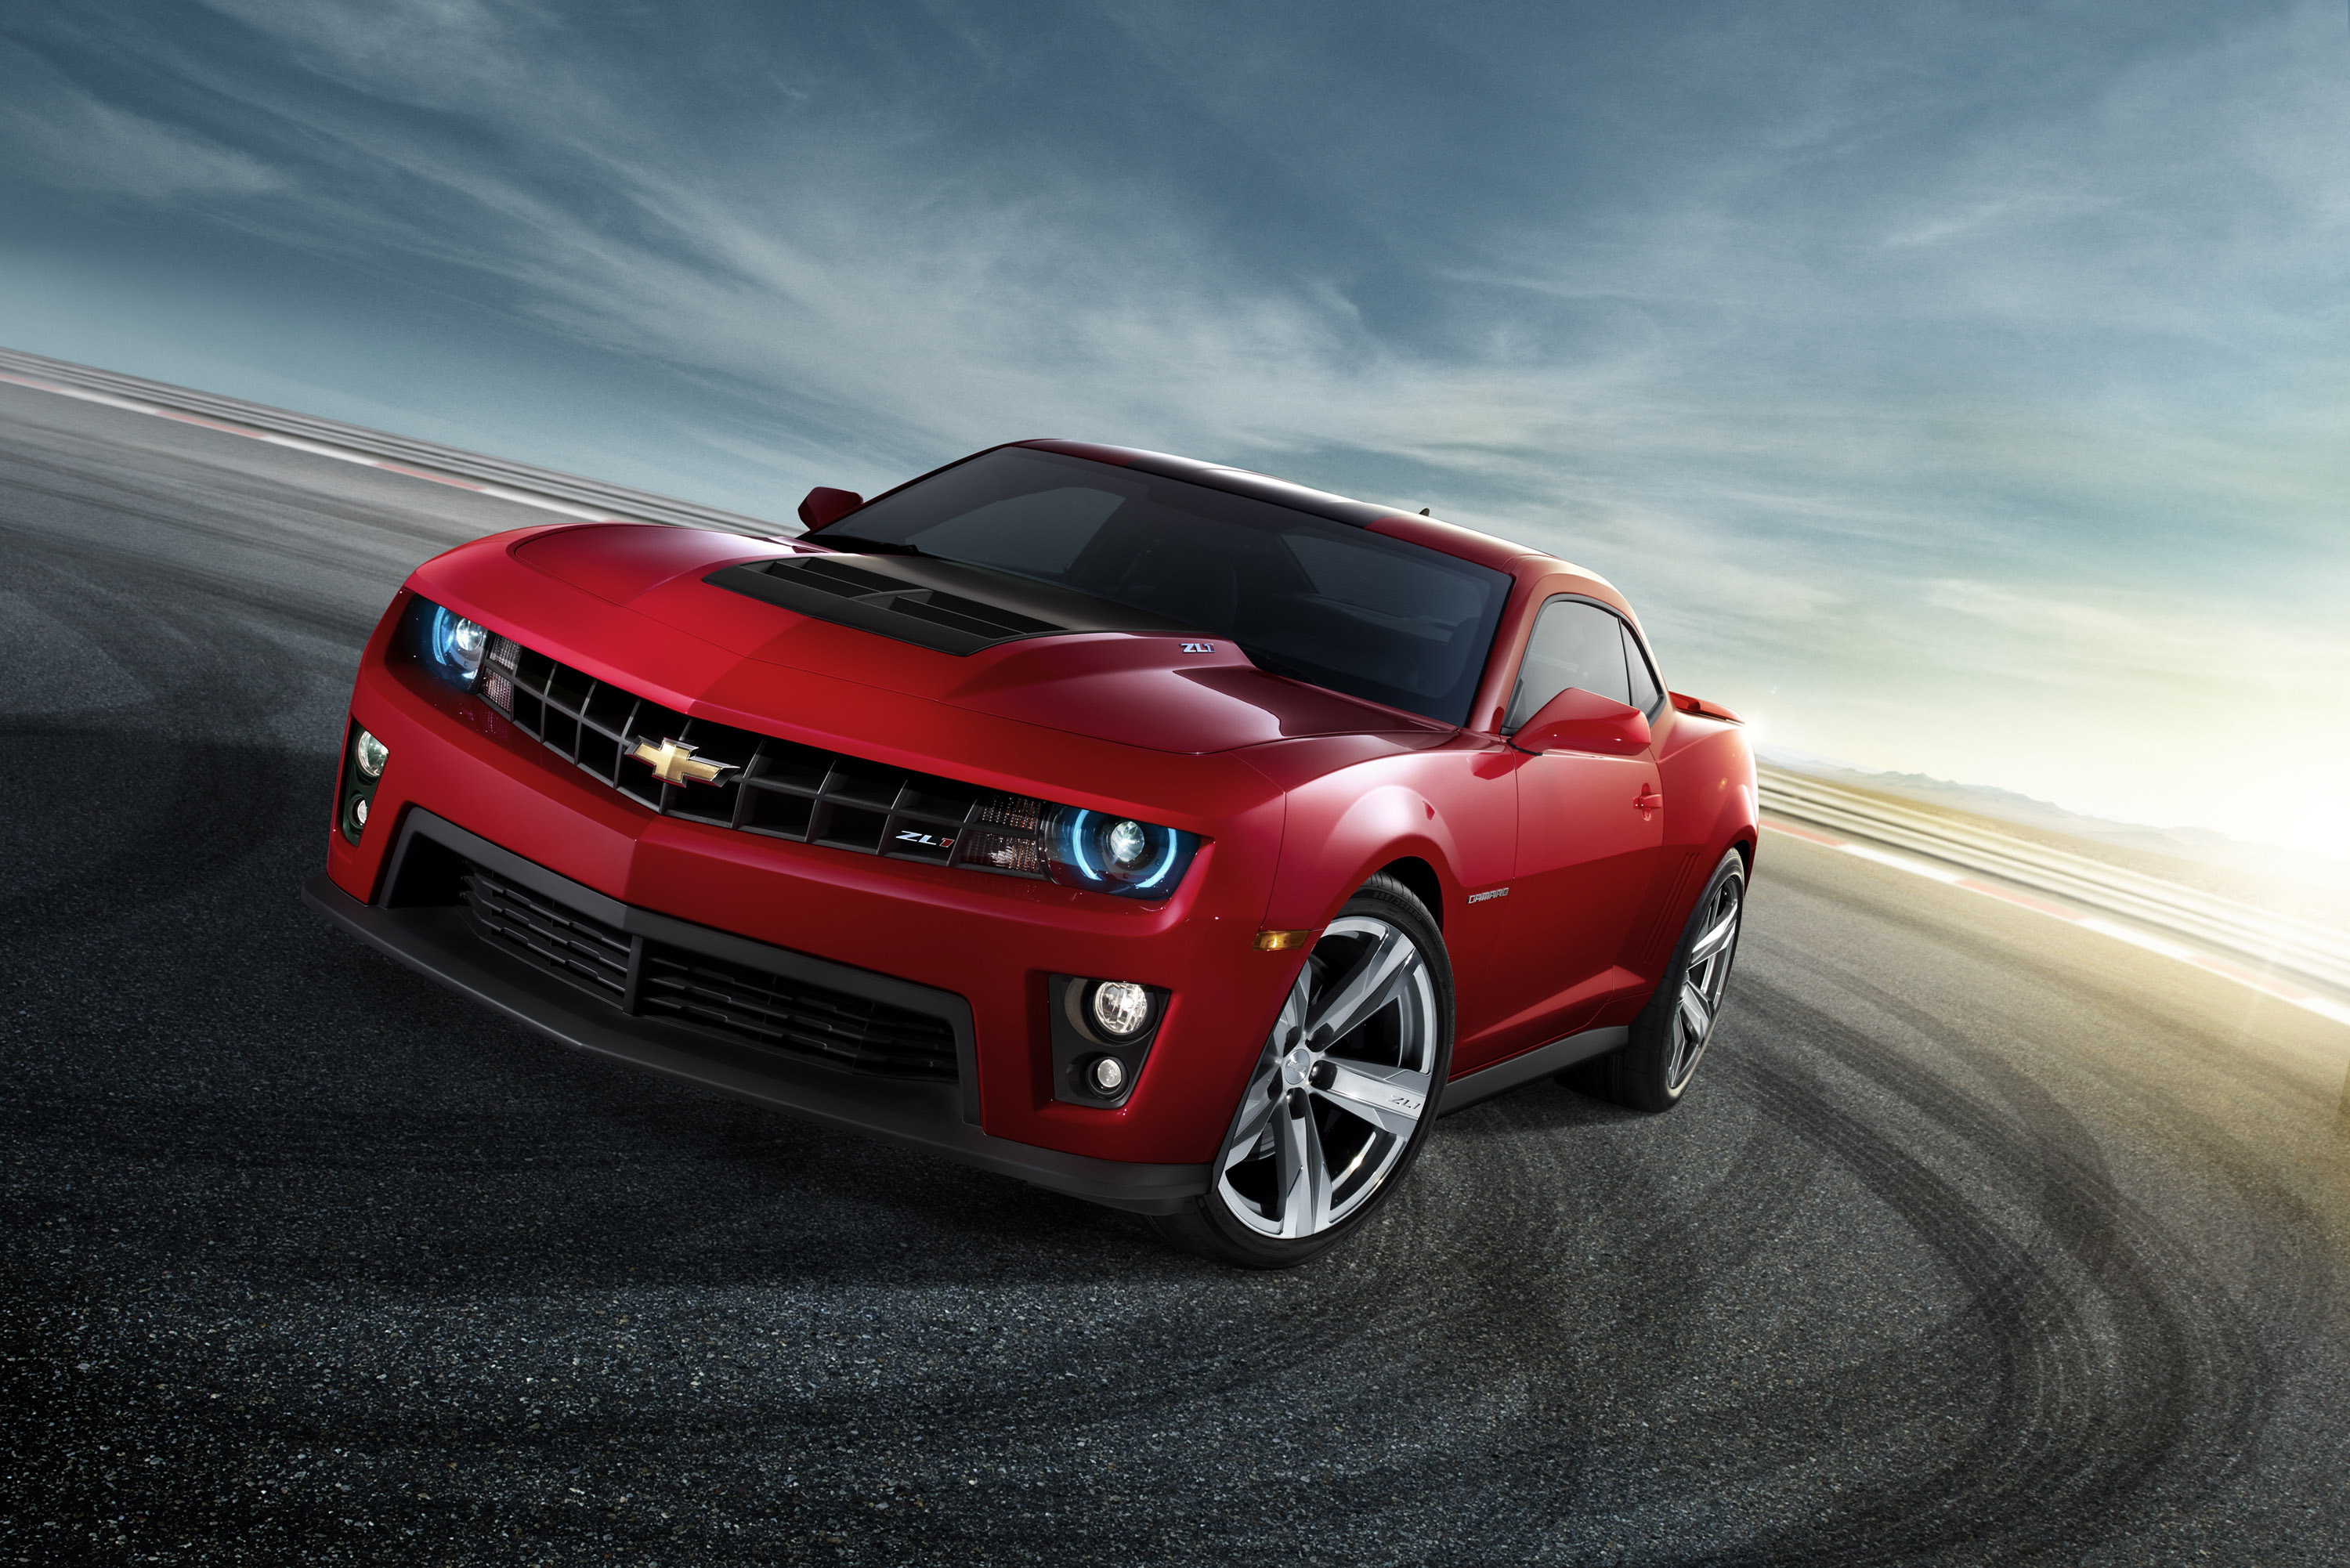 General Motors, Iconic muscle car, High-performance engine, Aggressive styling, 3000x2010 HD Desktop